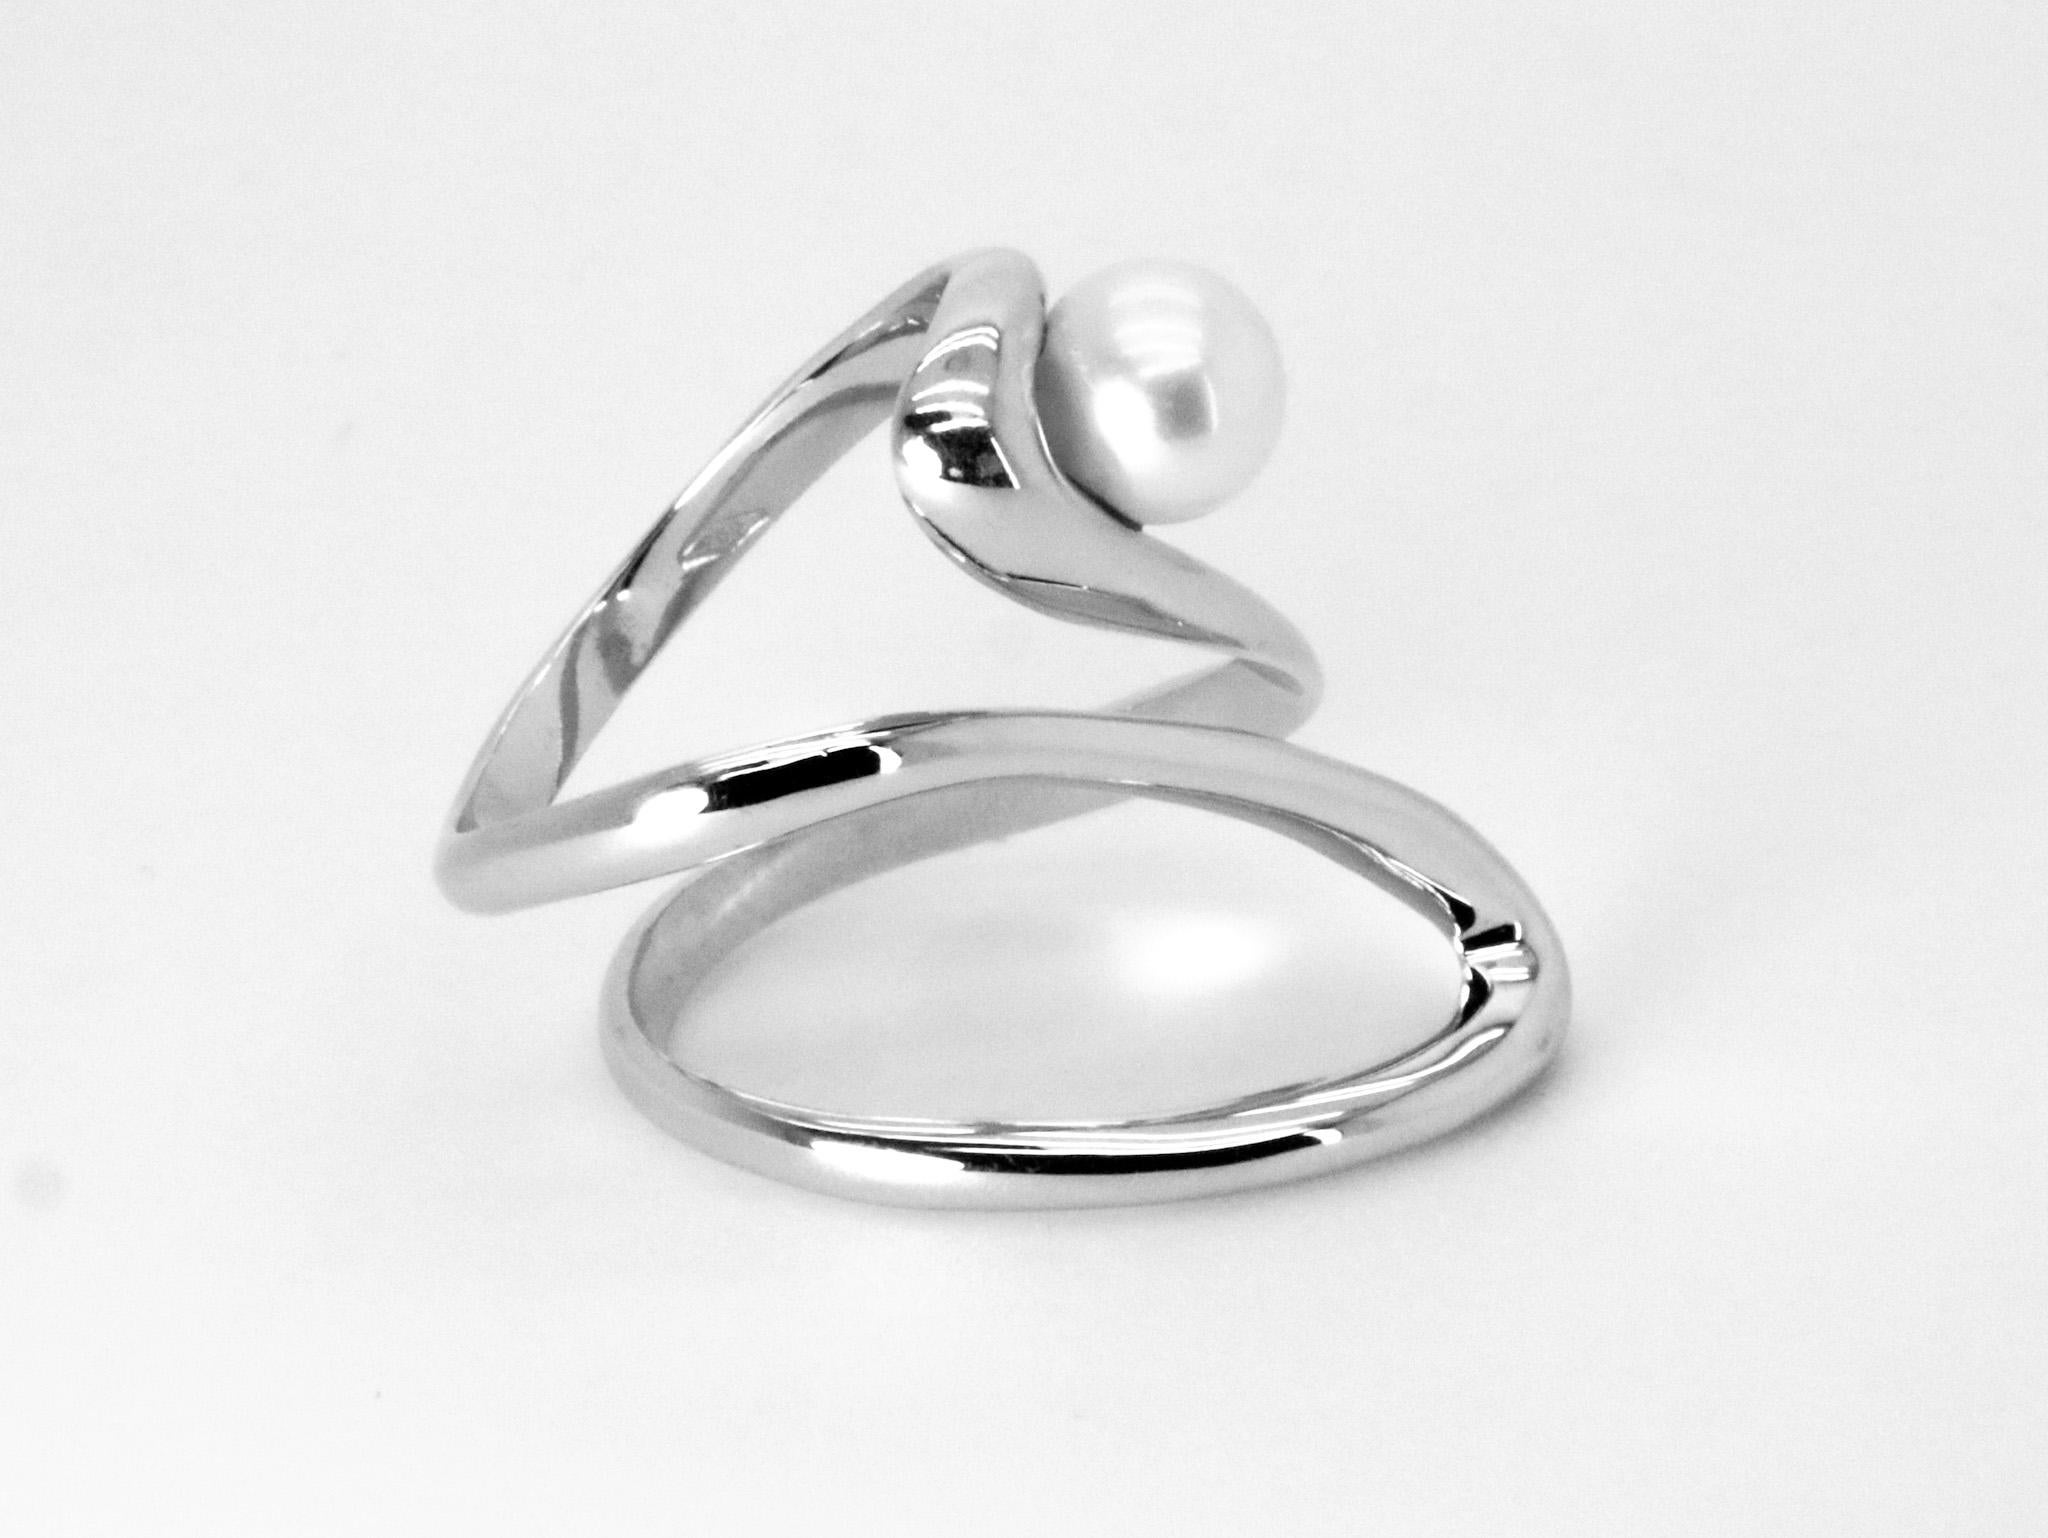 18K White Gold Cosmic Design White Pearl Gemini Beatrice Barzaghi Cocktail Ring For Sale 2